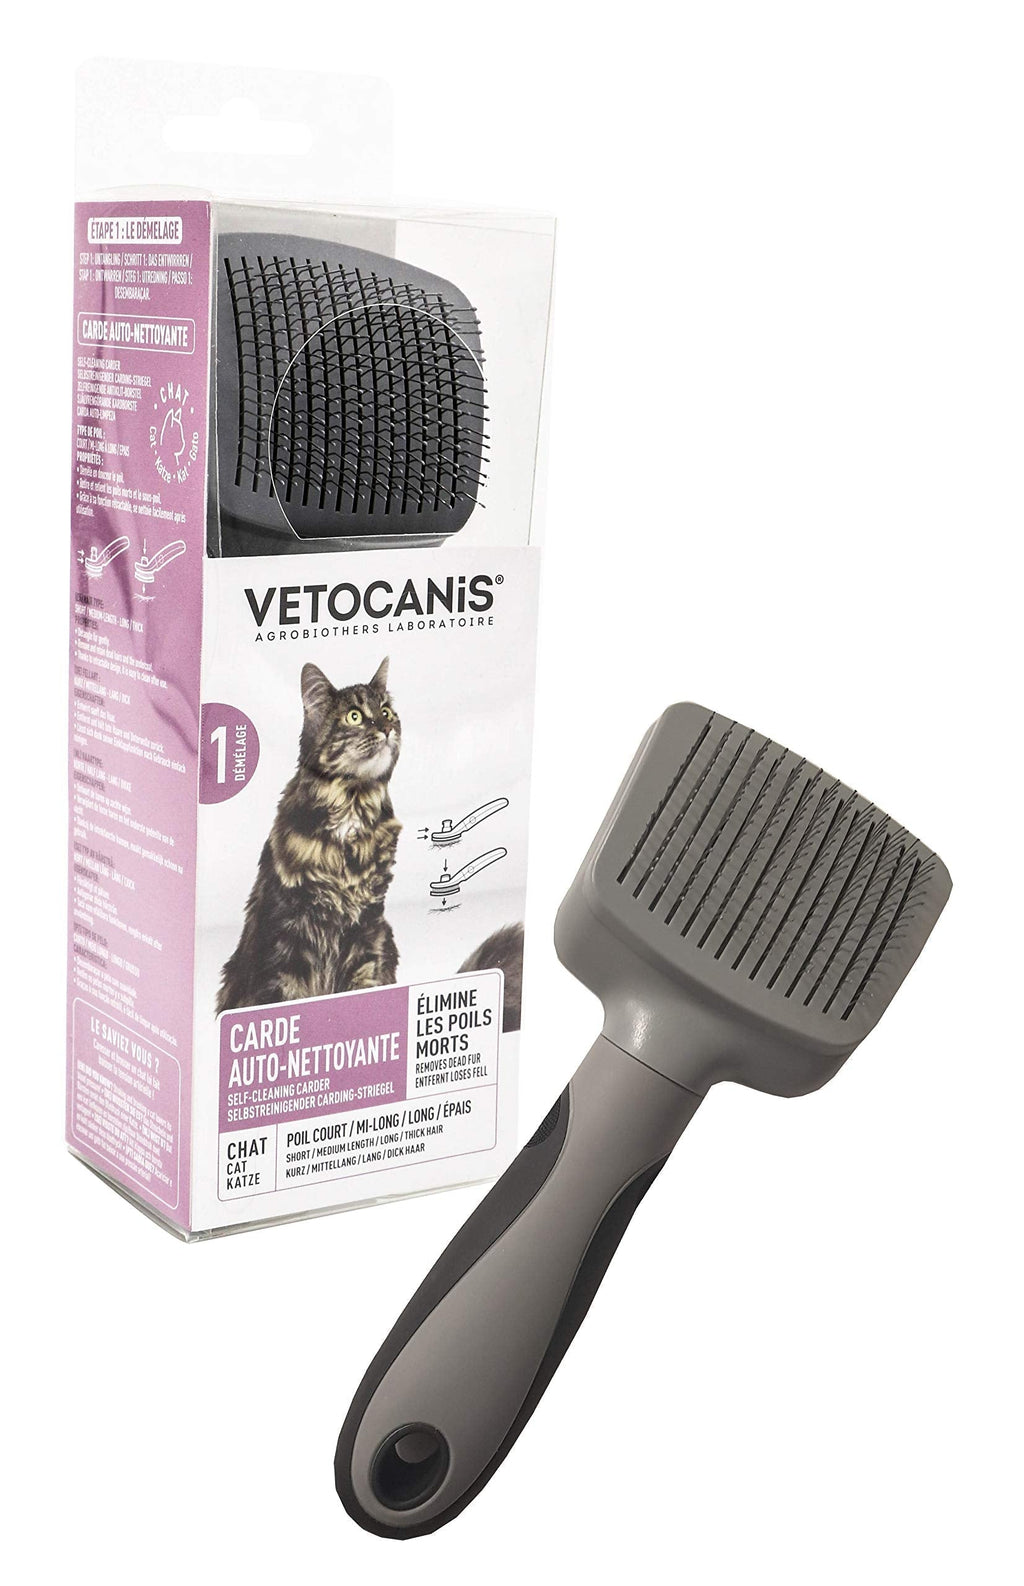 Vetocanis Retractable and Self-Cleaning Carding Brush for Cats, 0.16301 kg - PawsPlanet Australia